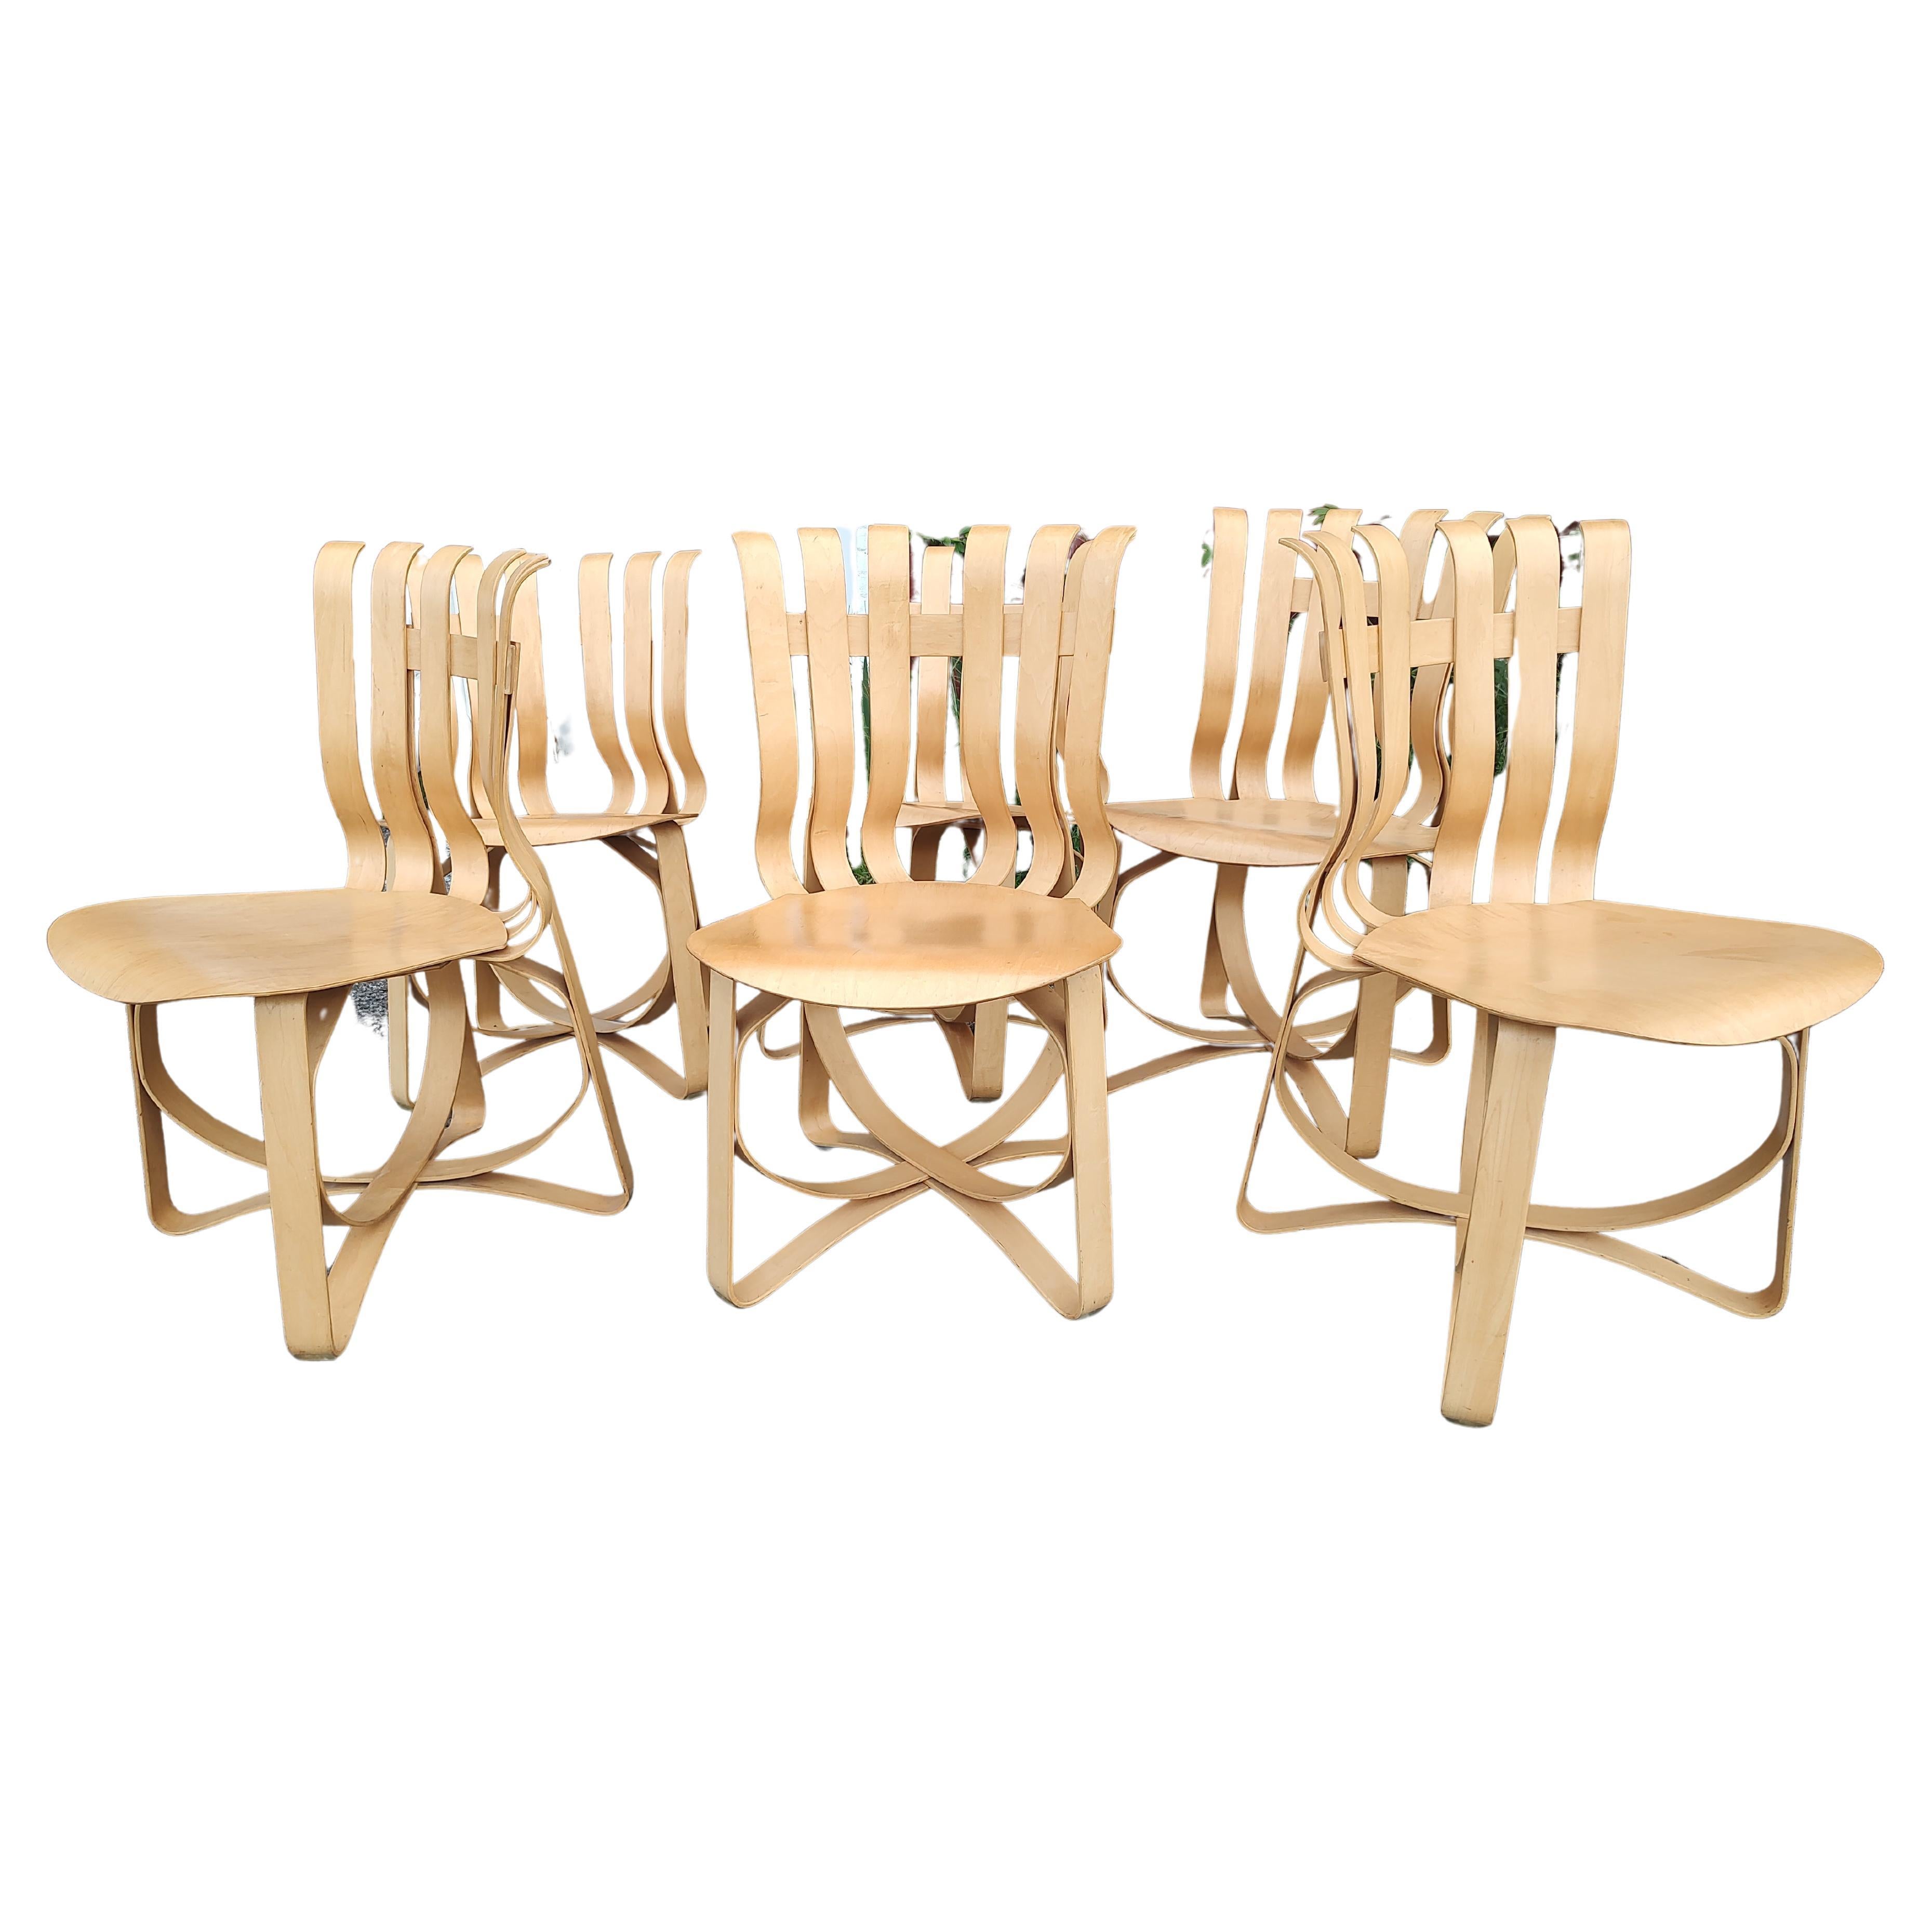 Mid-Century Modern Mid Century Modern Sculptural Birch 6 Hat Trick Chairs by Frank Gehry - Knoll For Sale